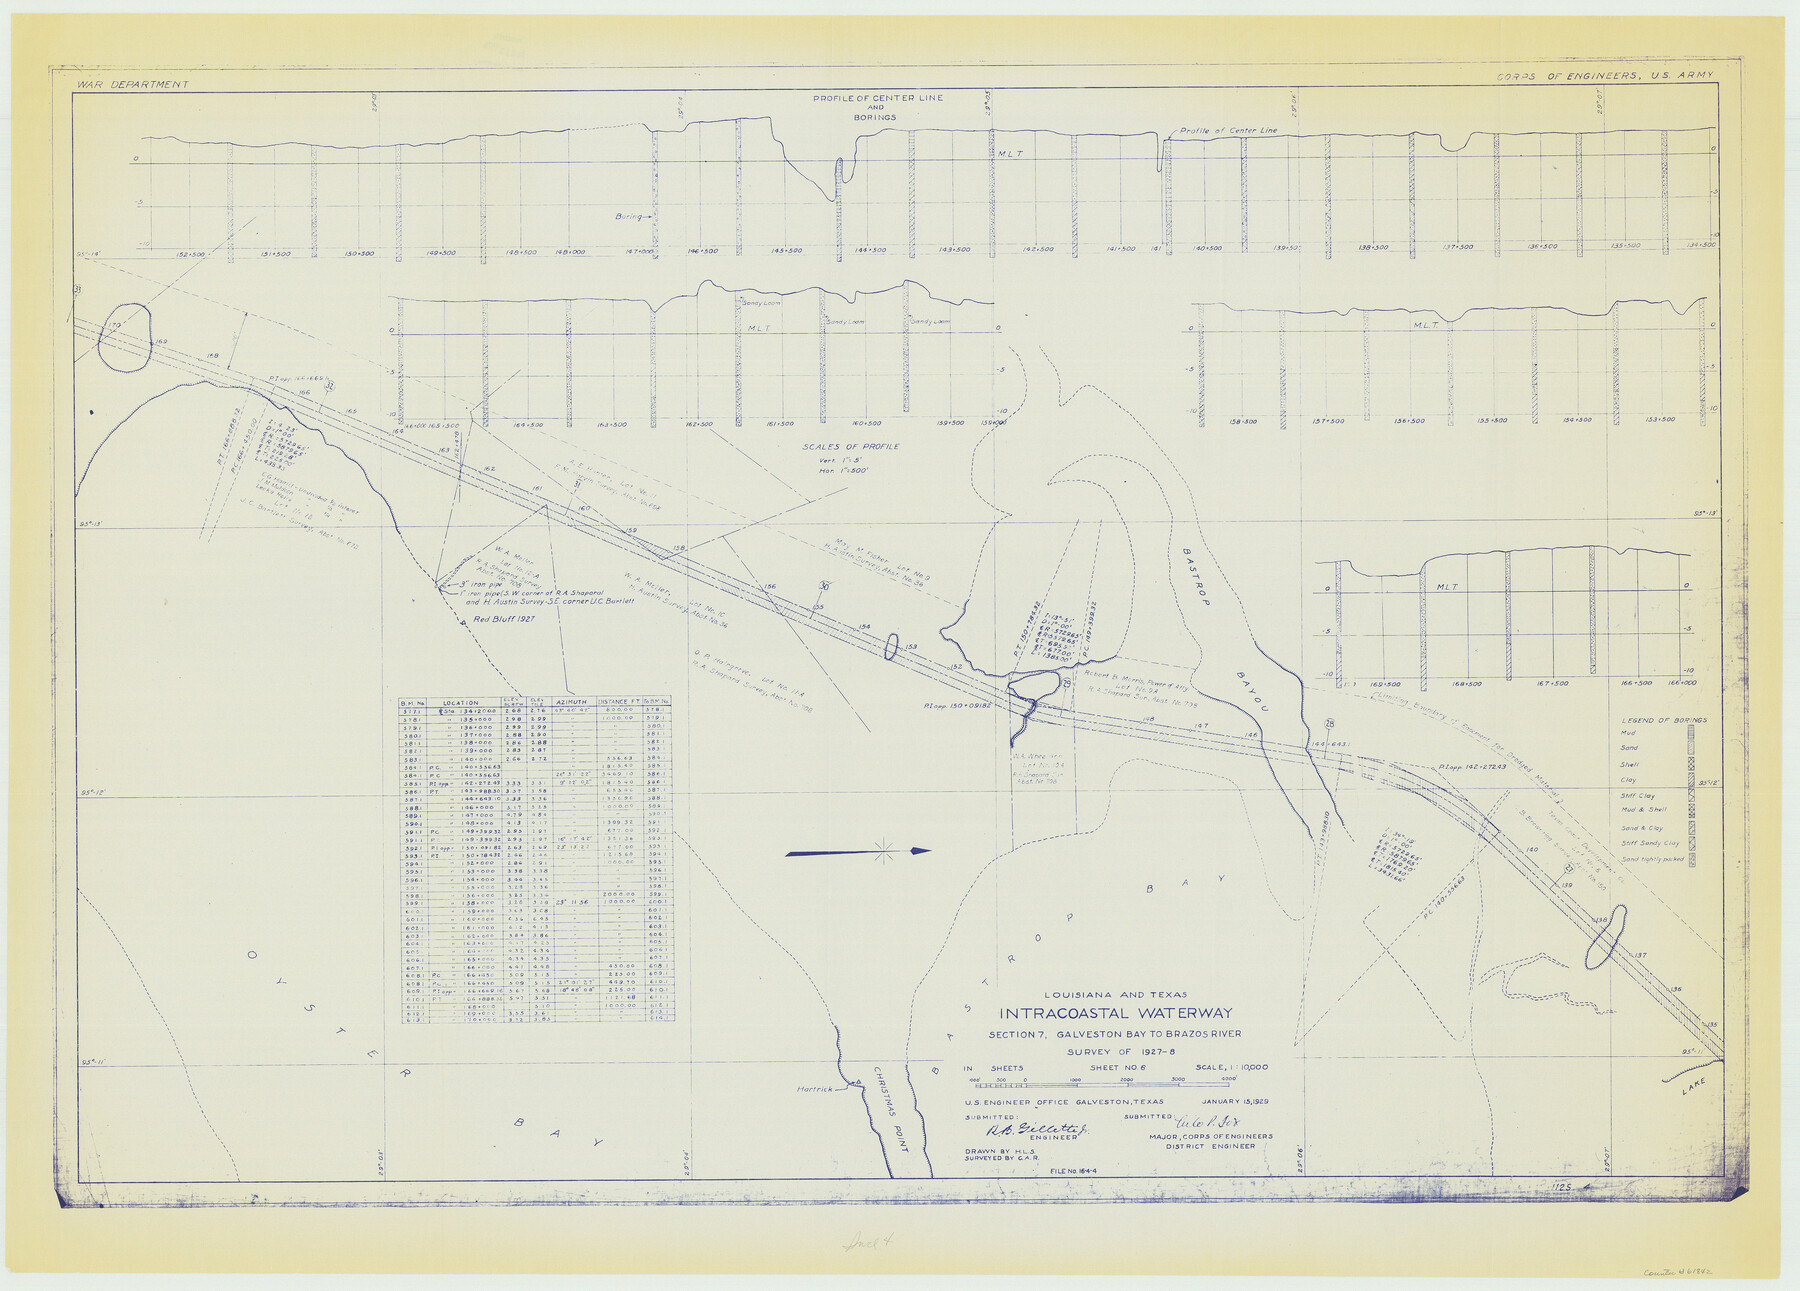 61842, Louisiana and Texas Intracoastal Waterway, Section 7, Galveston Bay to Brazos River and Section 8, Brazos River to Matagorda Bay, General Map Collection